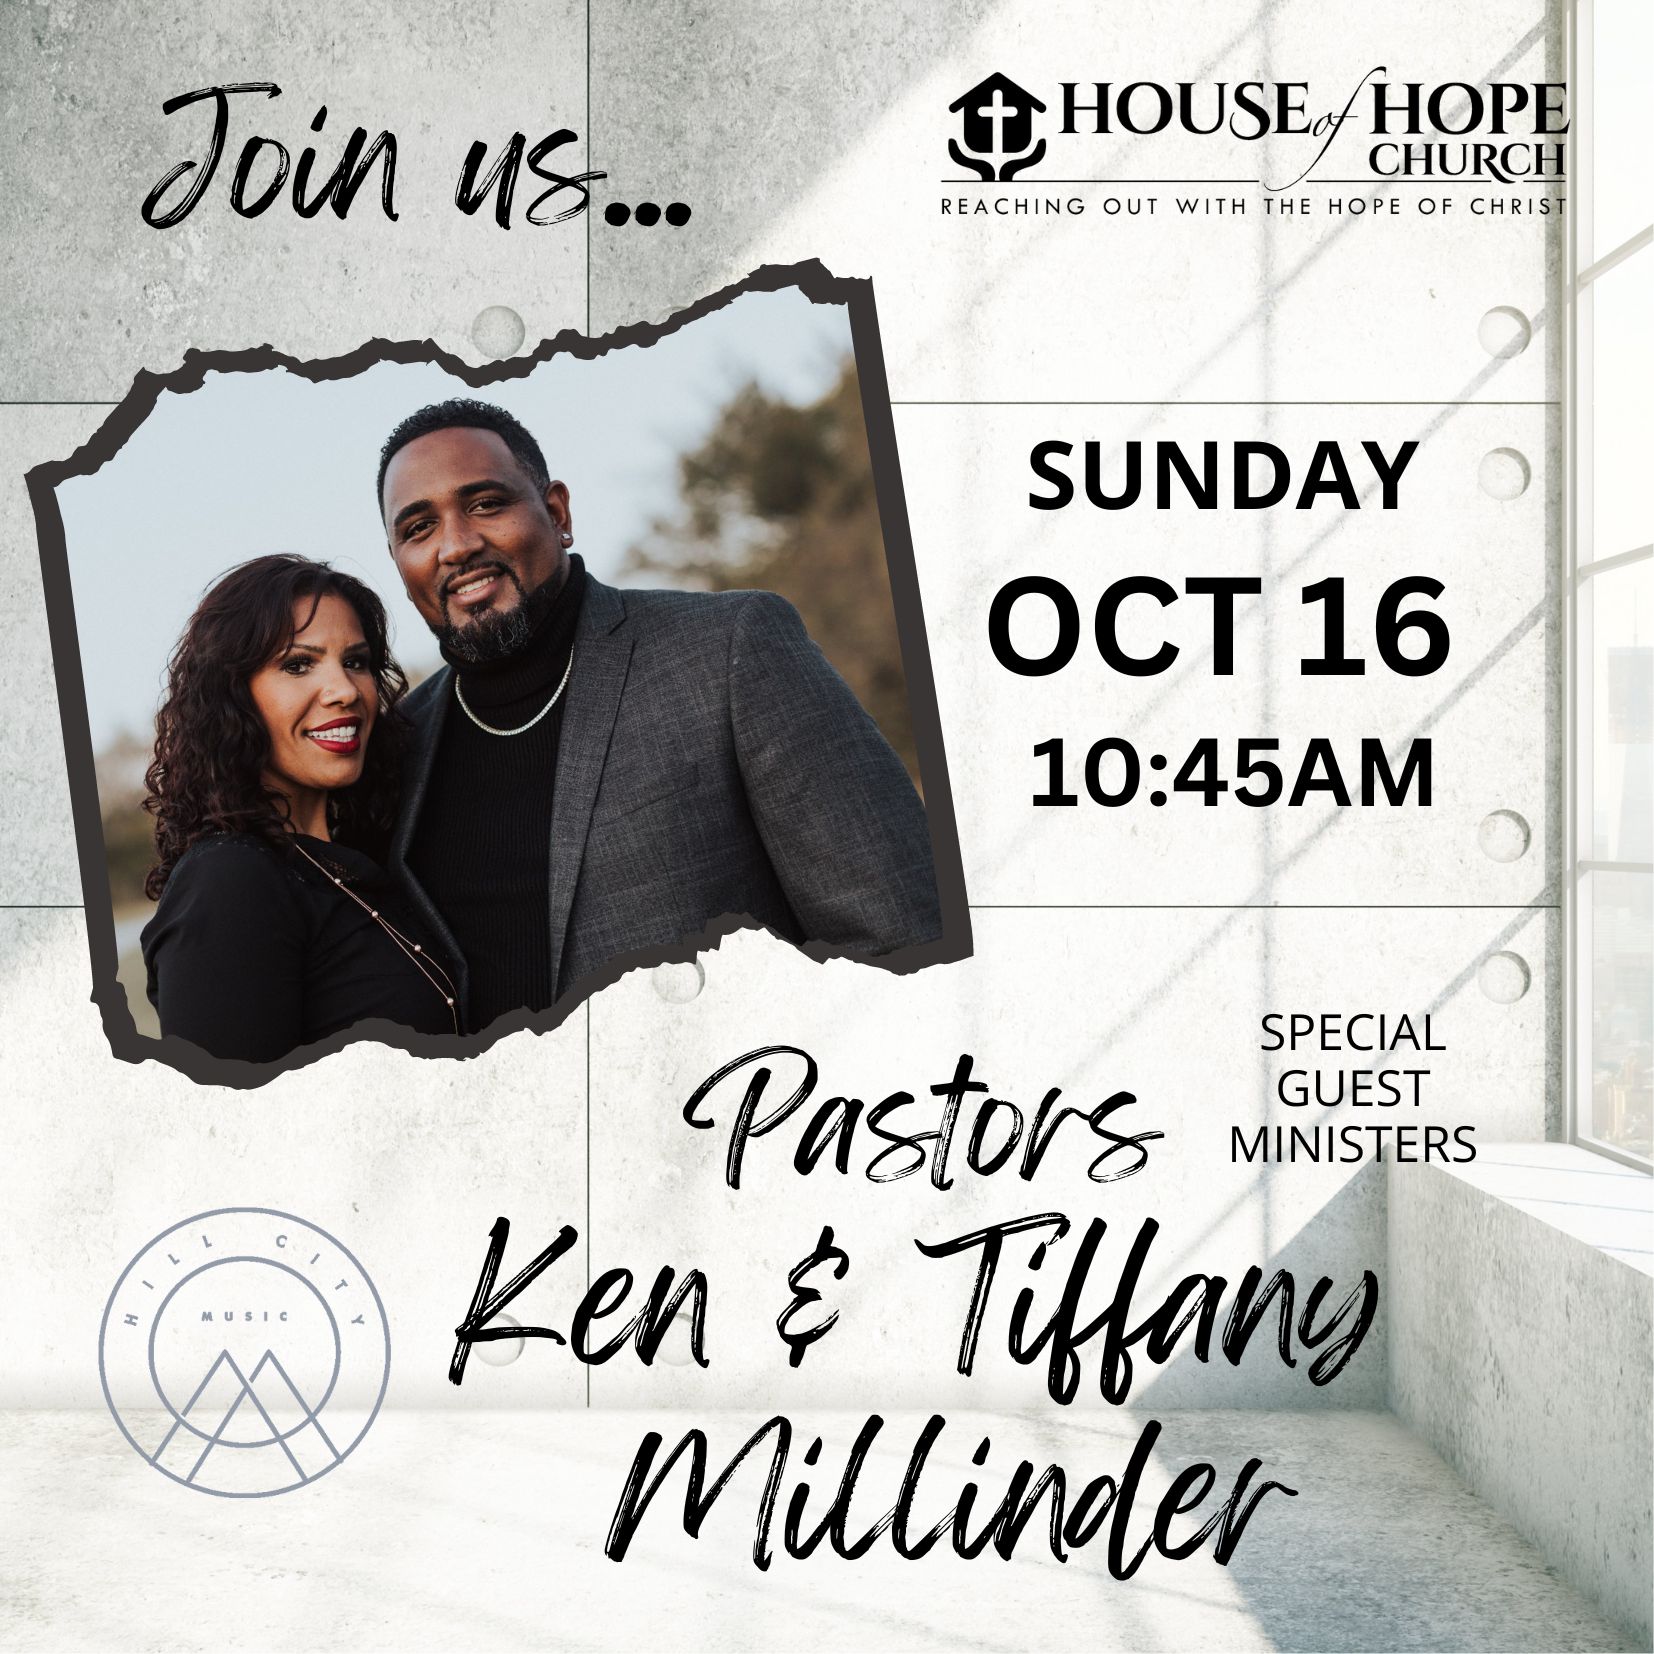 SPECIAL GUEST MINISTERS PASTORS KEN & TIFFANY MILLINDER OF HILL CITY MINISTRIES